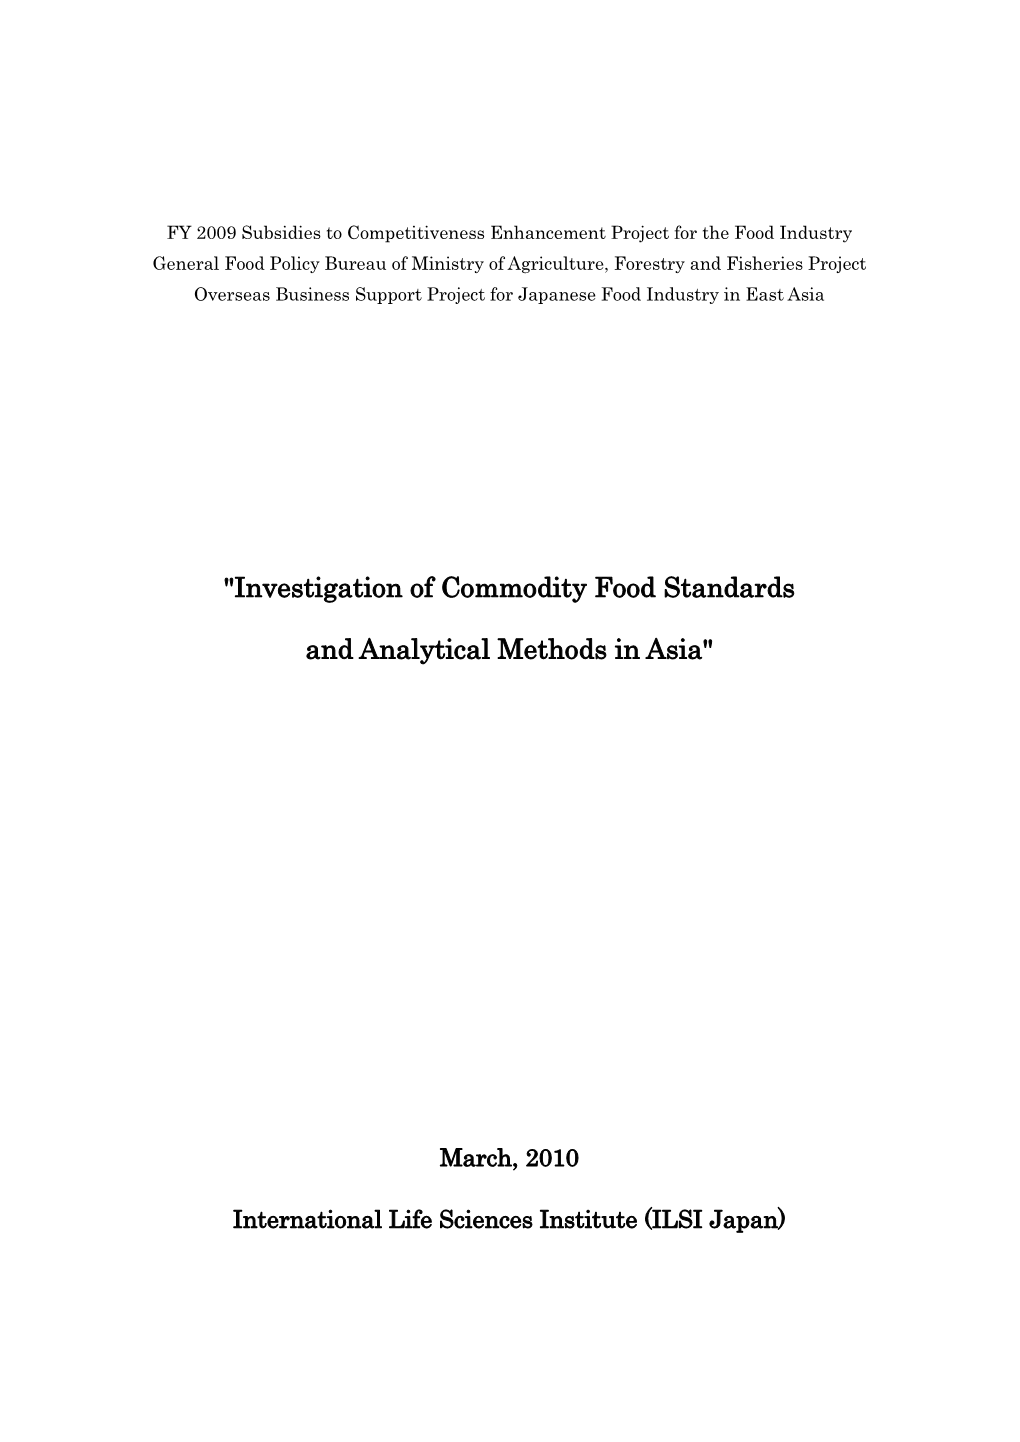 Investigation of Commodity Food Standards and Analytical Methods in Asia"